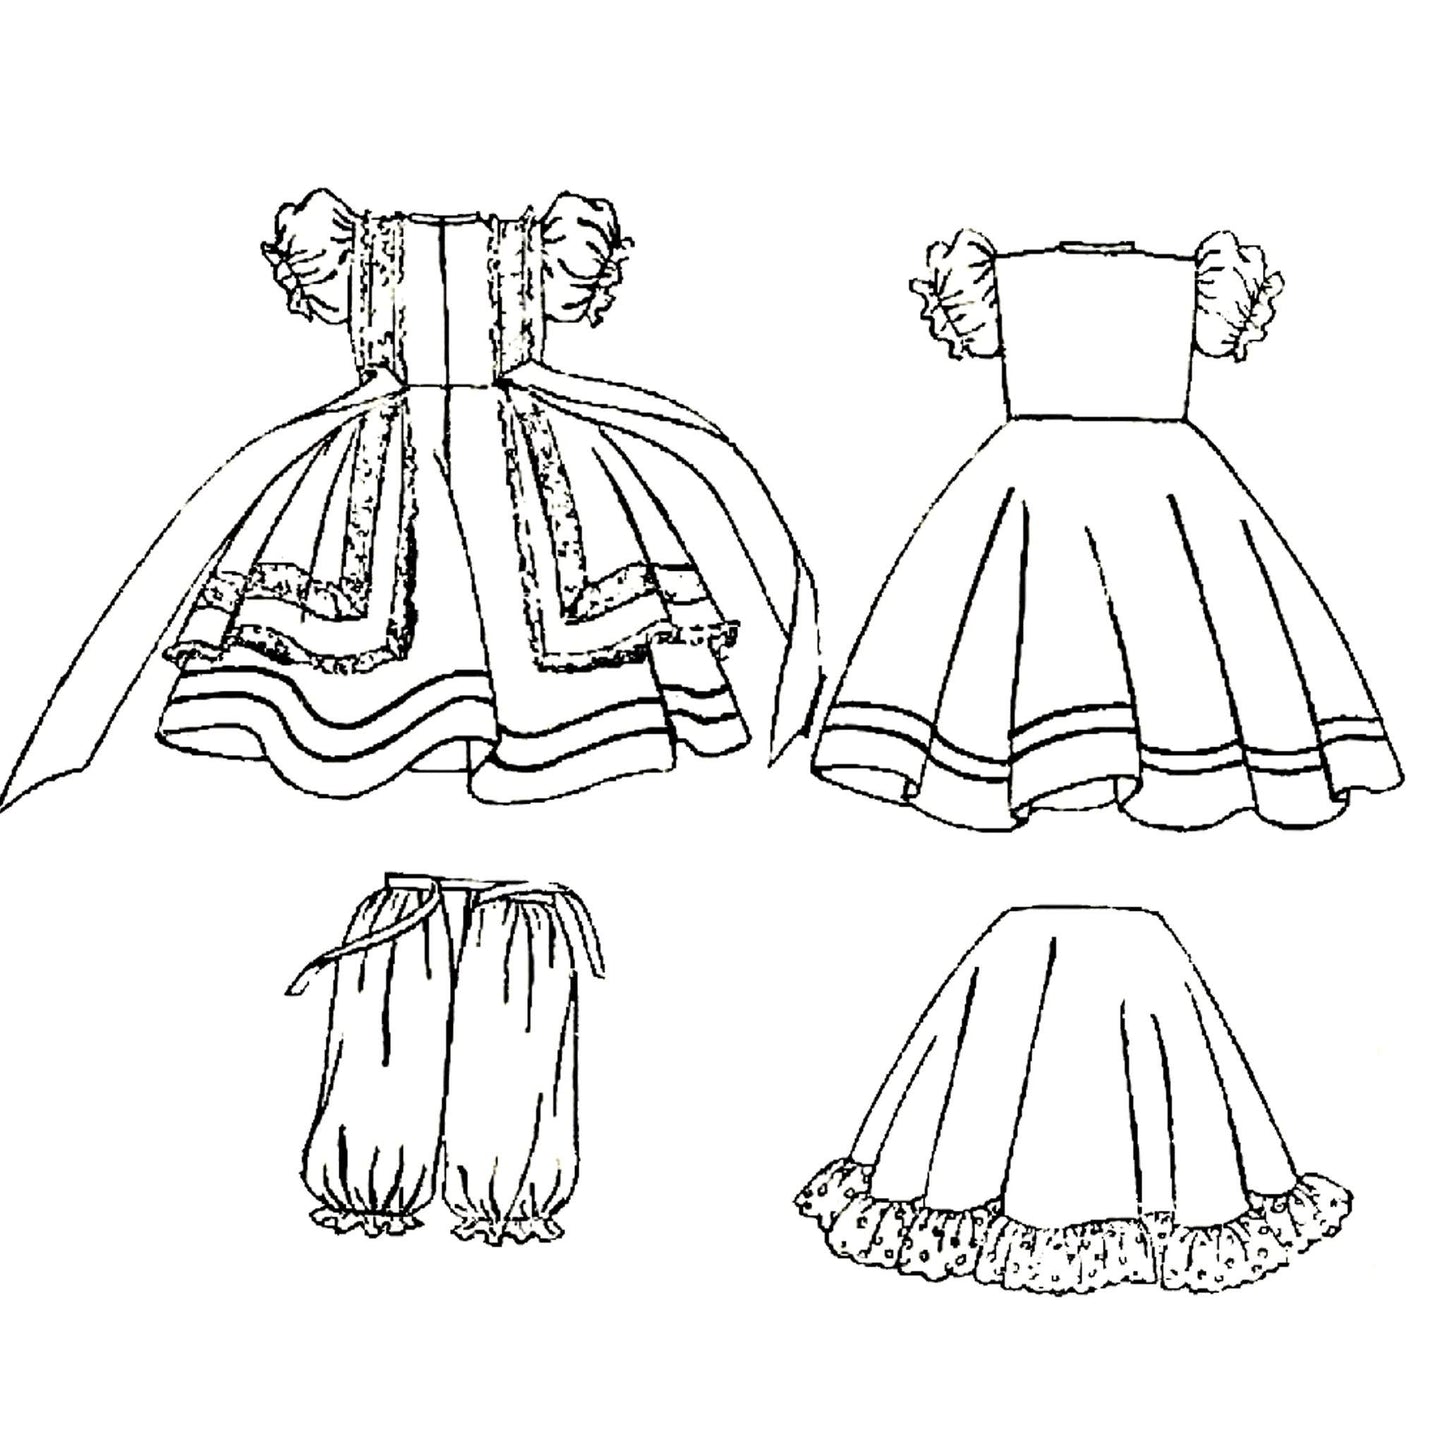 Line drawing of the dolls garments included in '1940's Child's Alice in Wonderland Doll'. Front and back view of dress and front views of bloomers and petticoat.